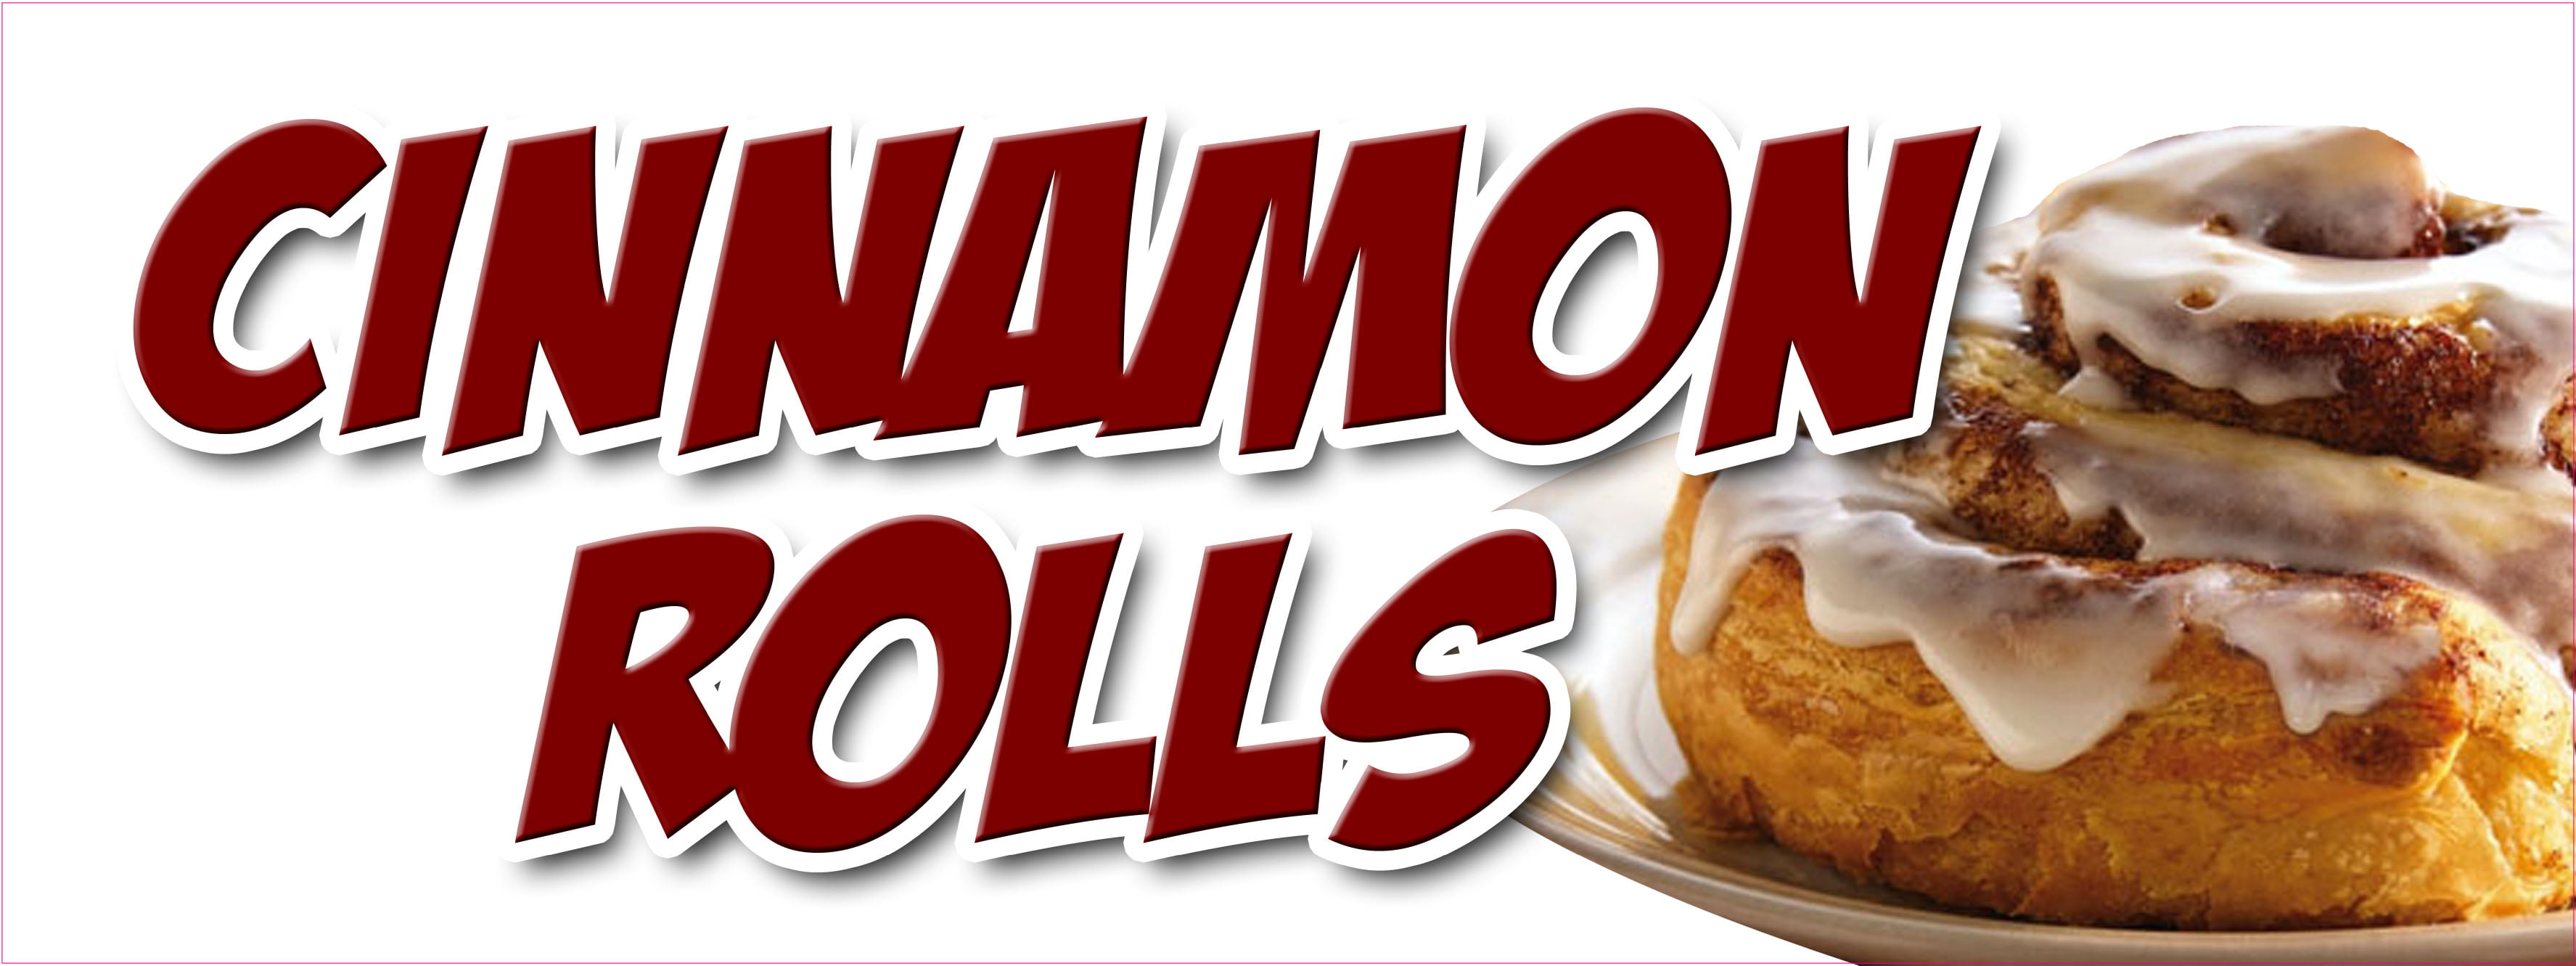 Cinnamon Rolls DECAL Concession Food Truck Vinyl Sticker CHOOSE YOUR SIZE 